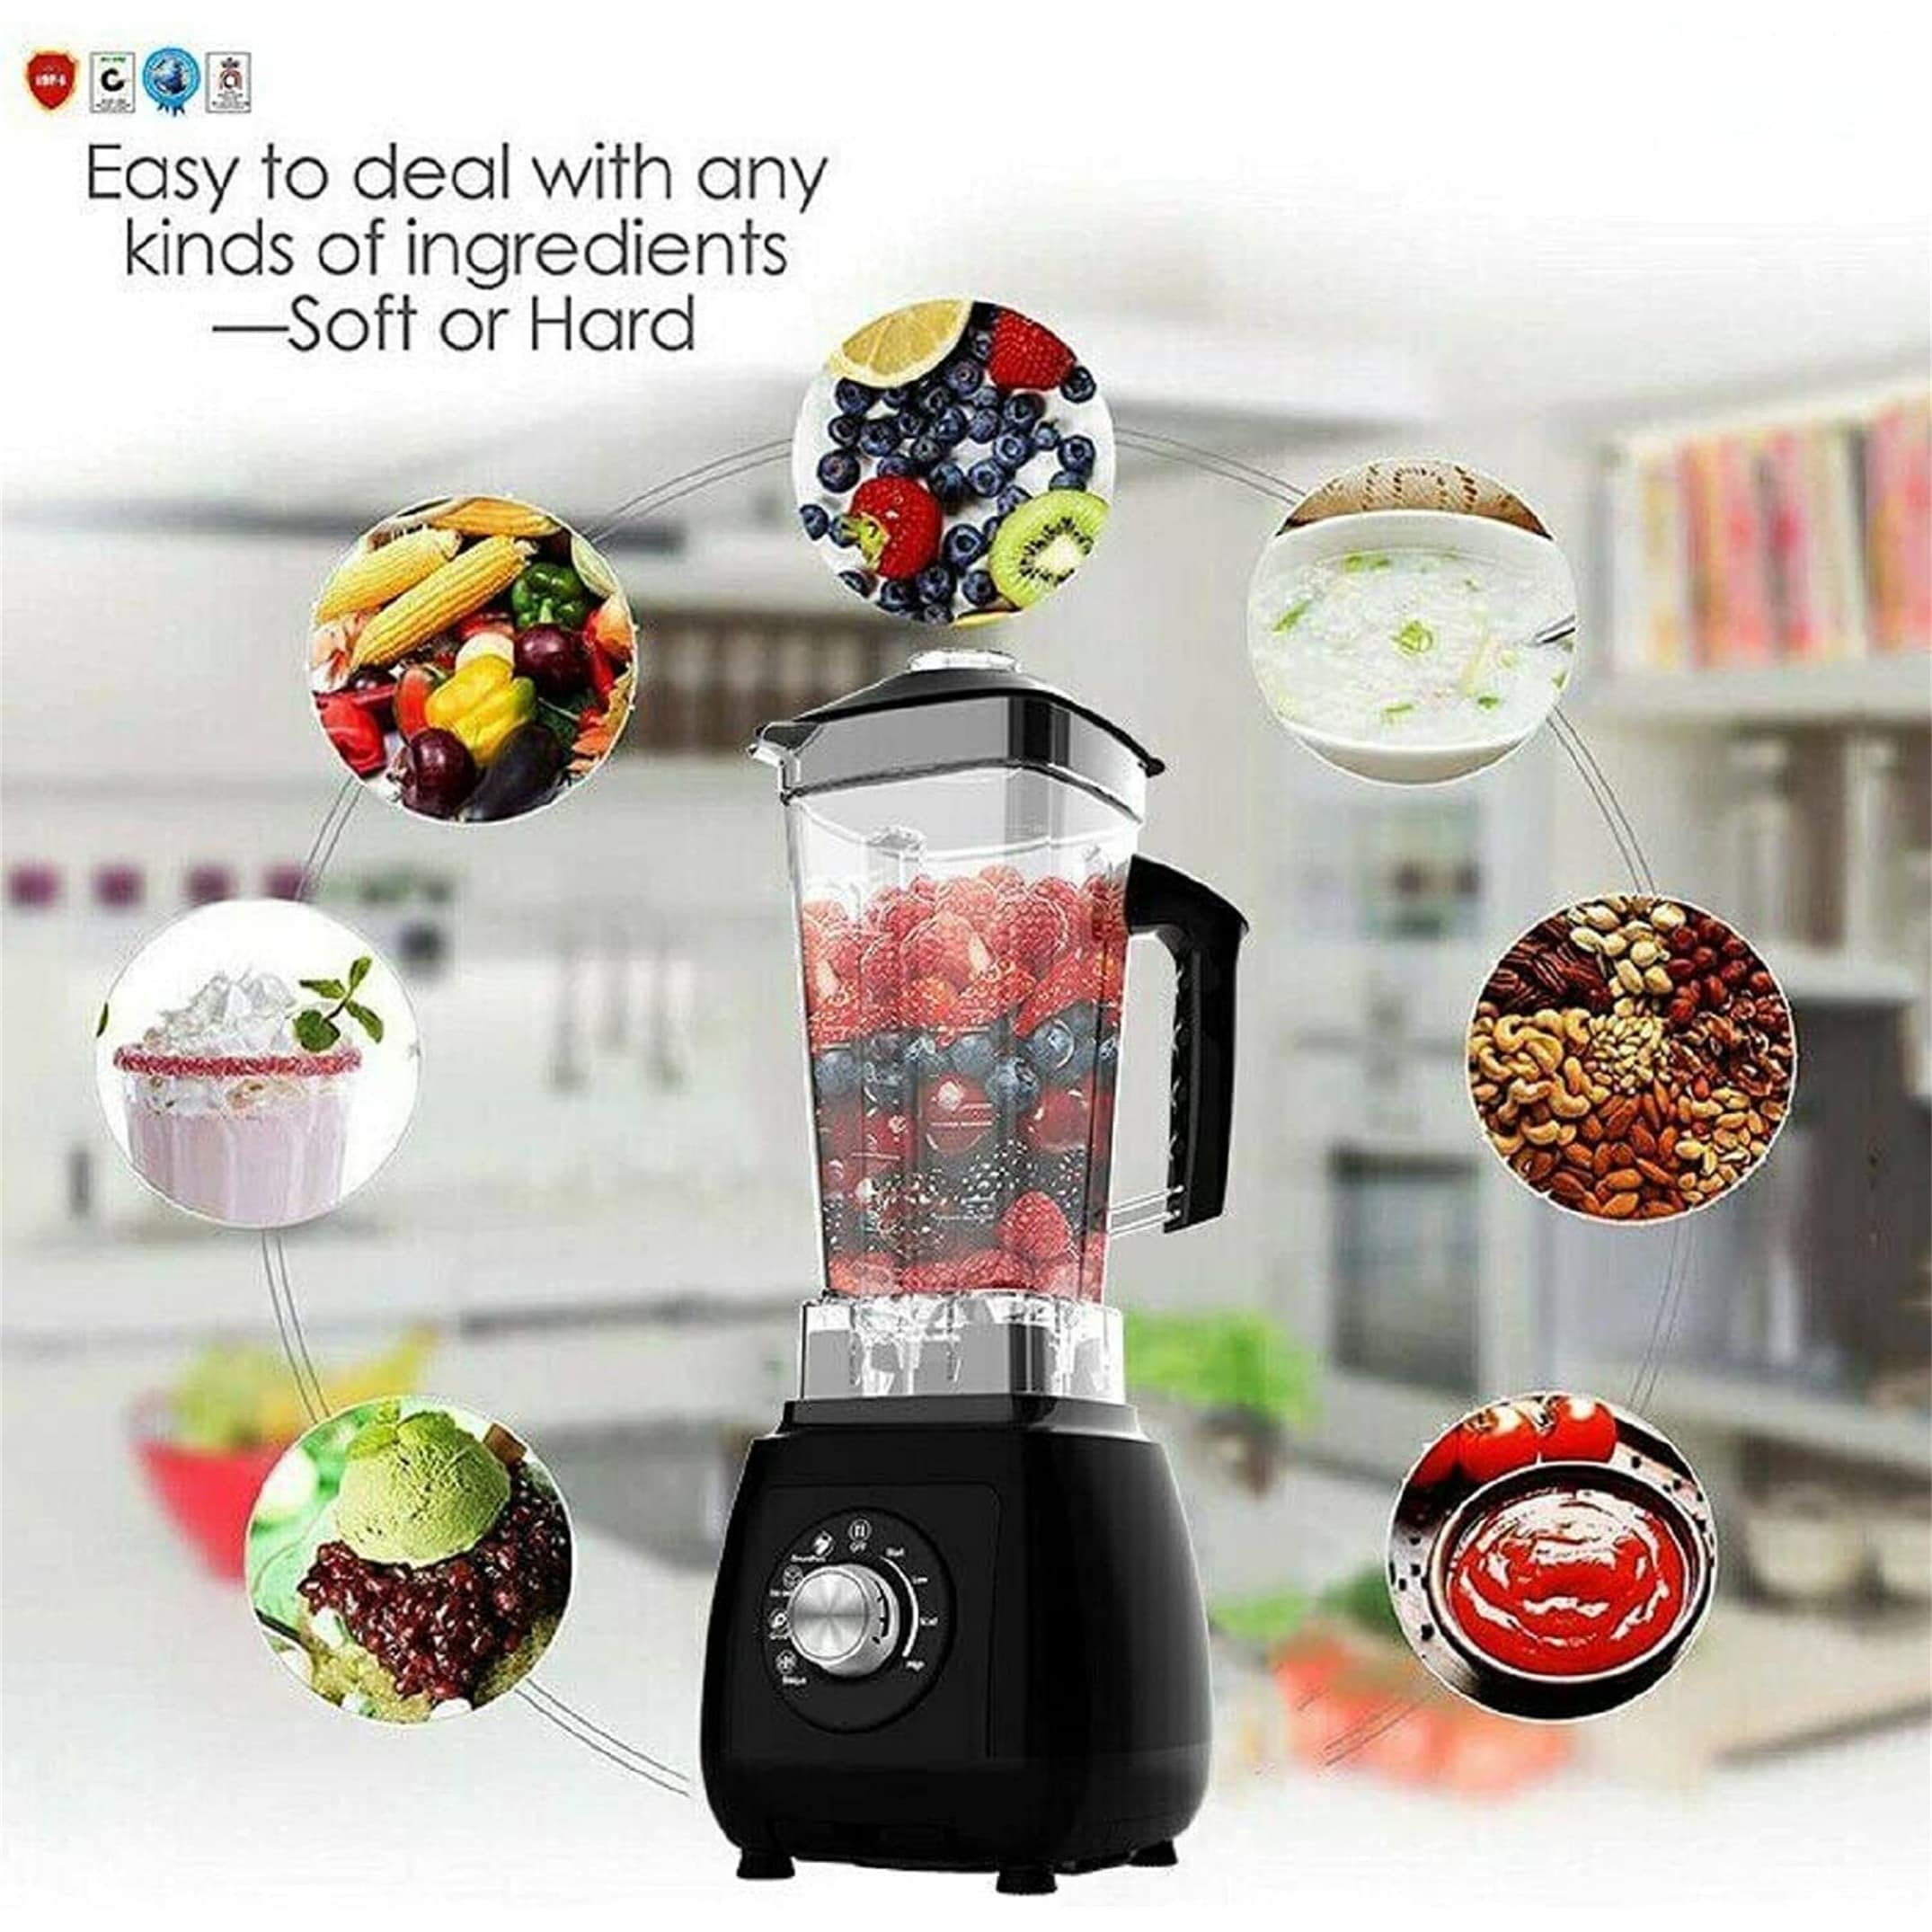 https://ak1.ostkcdn.com/images/products/is/images/direct/2f54e69d340eeb35bc5937d926b8c6314a1d3efd/Professional-Electric-Blenders-Soup-Smoothie-Shake-Mixer-Blend-Grind.jpg